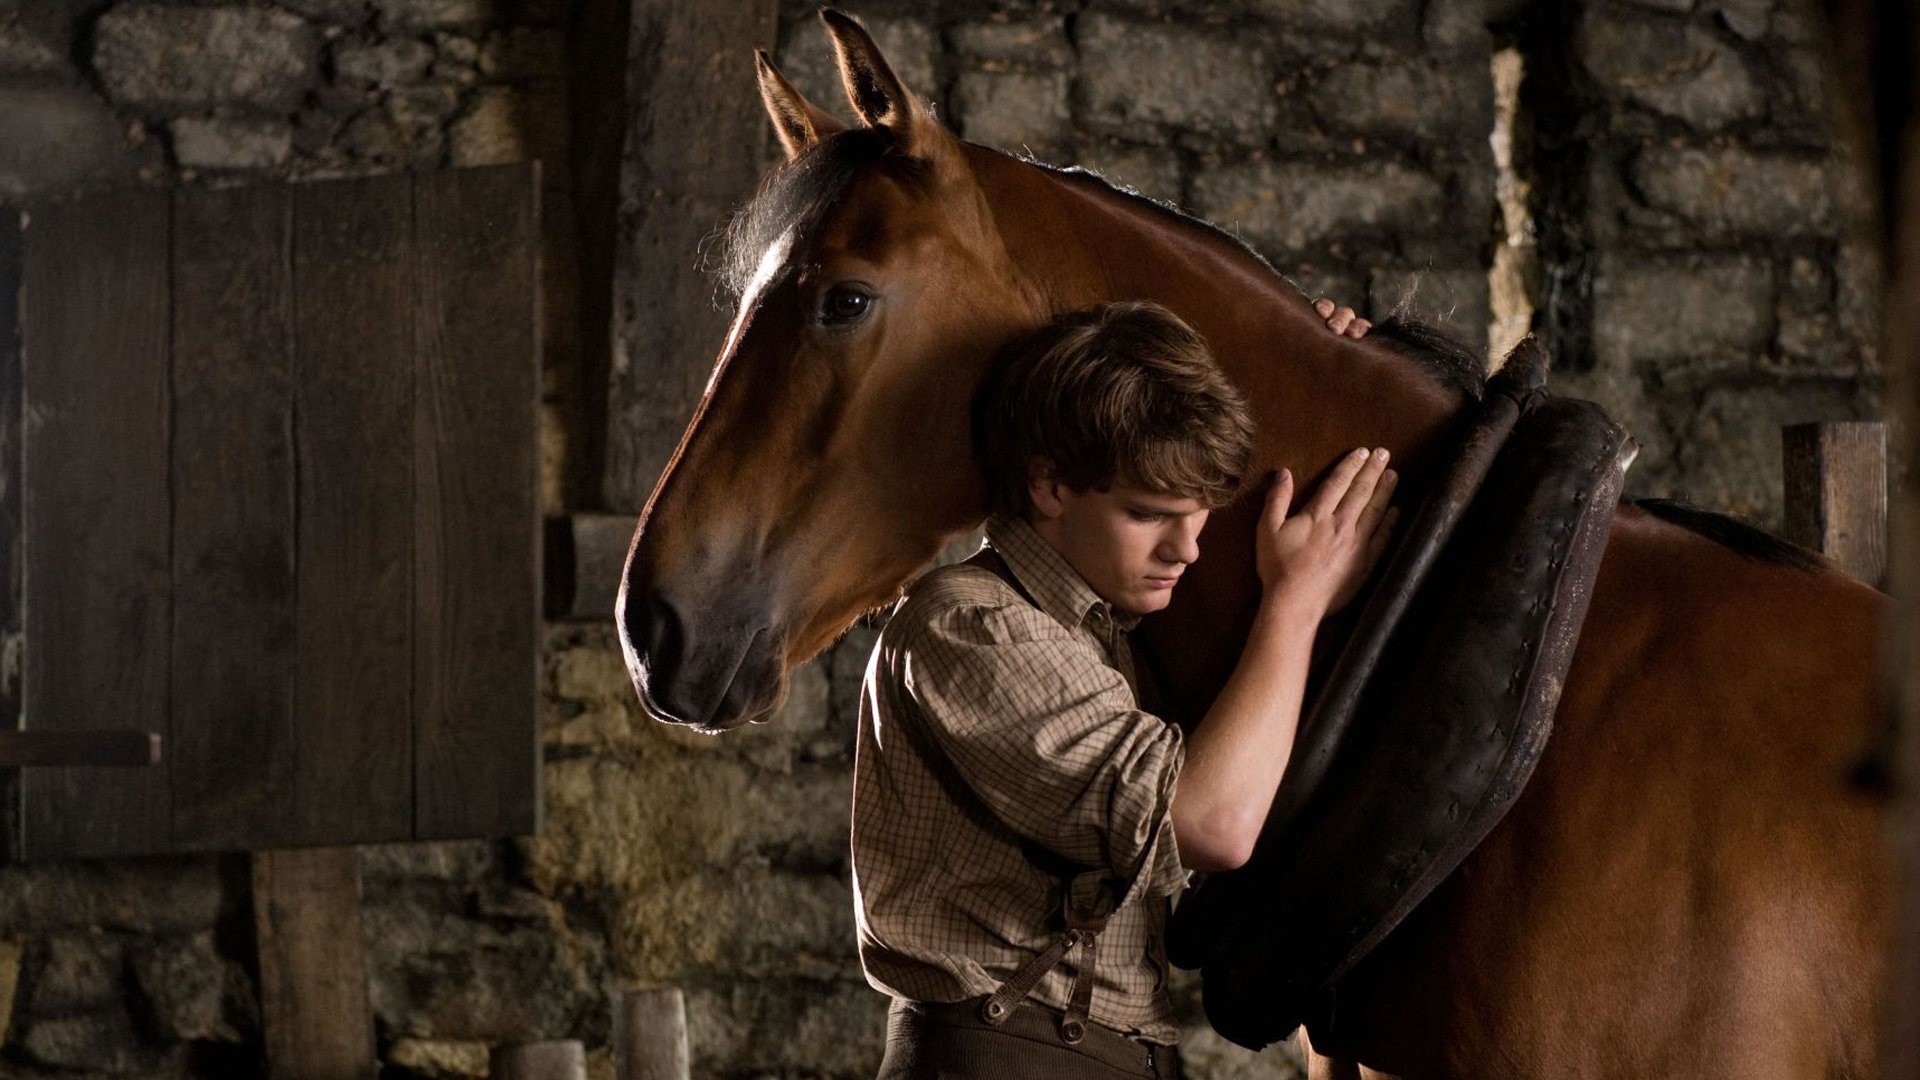 War Horse: Albert and Joey, living on a farm in the British countryside. 1920x1080 Full HD Wallpaper.